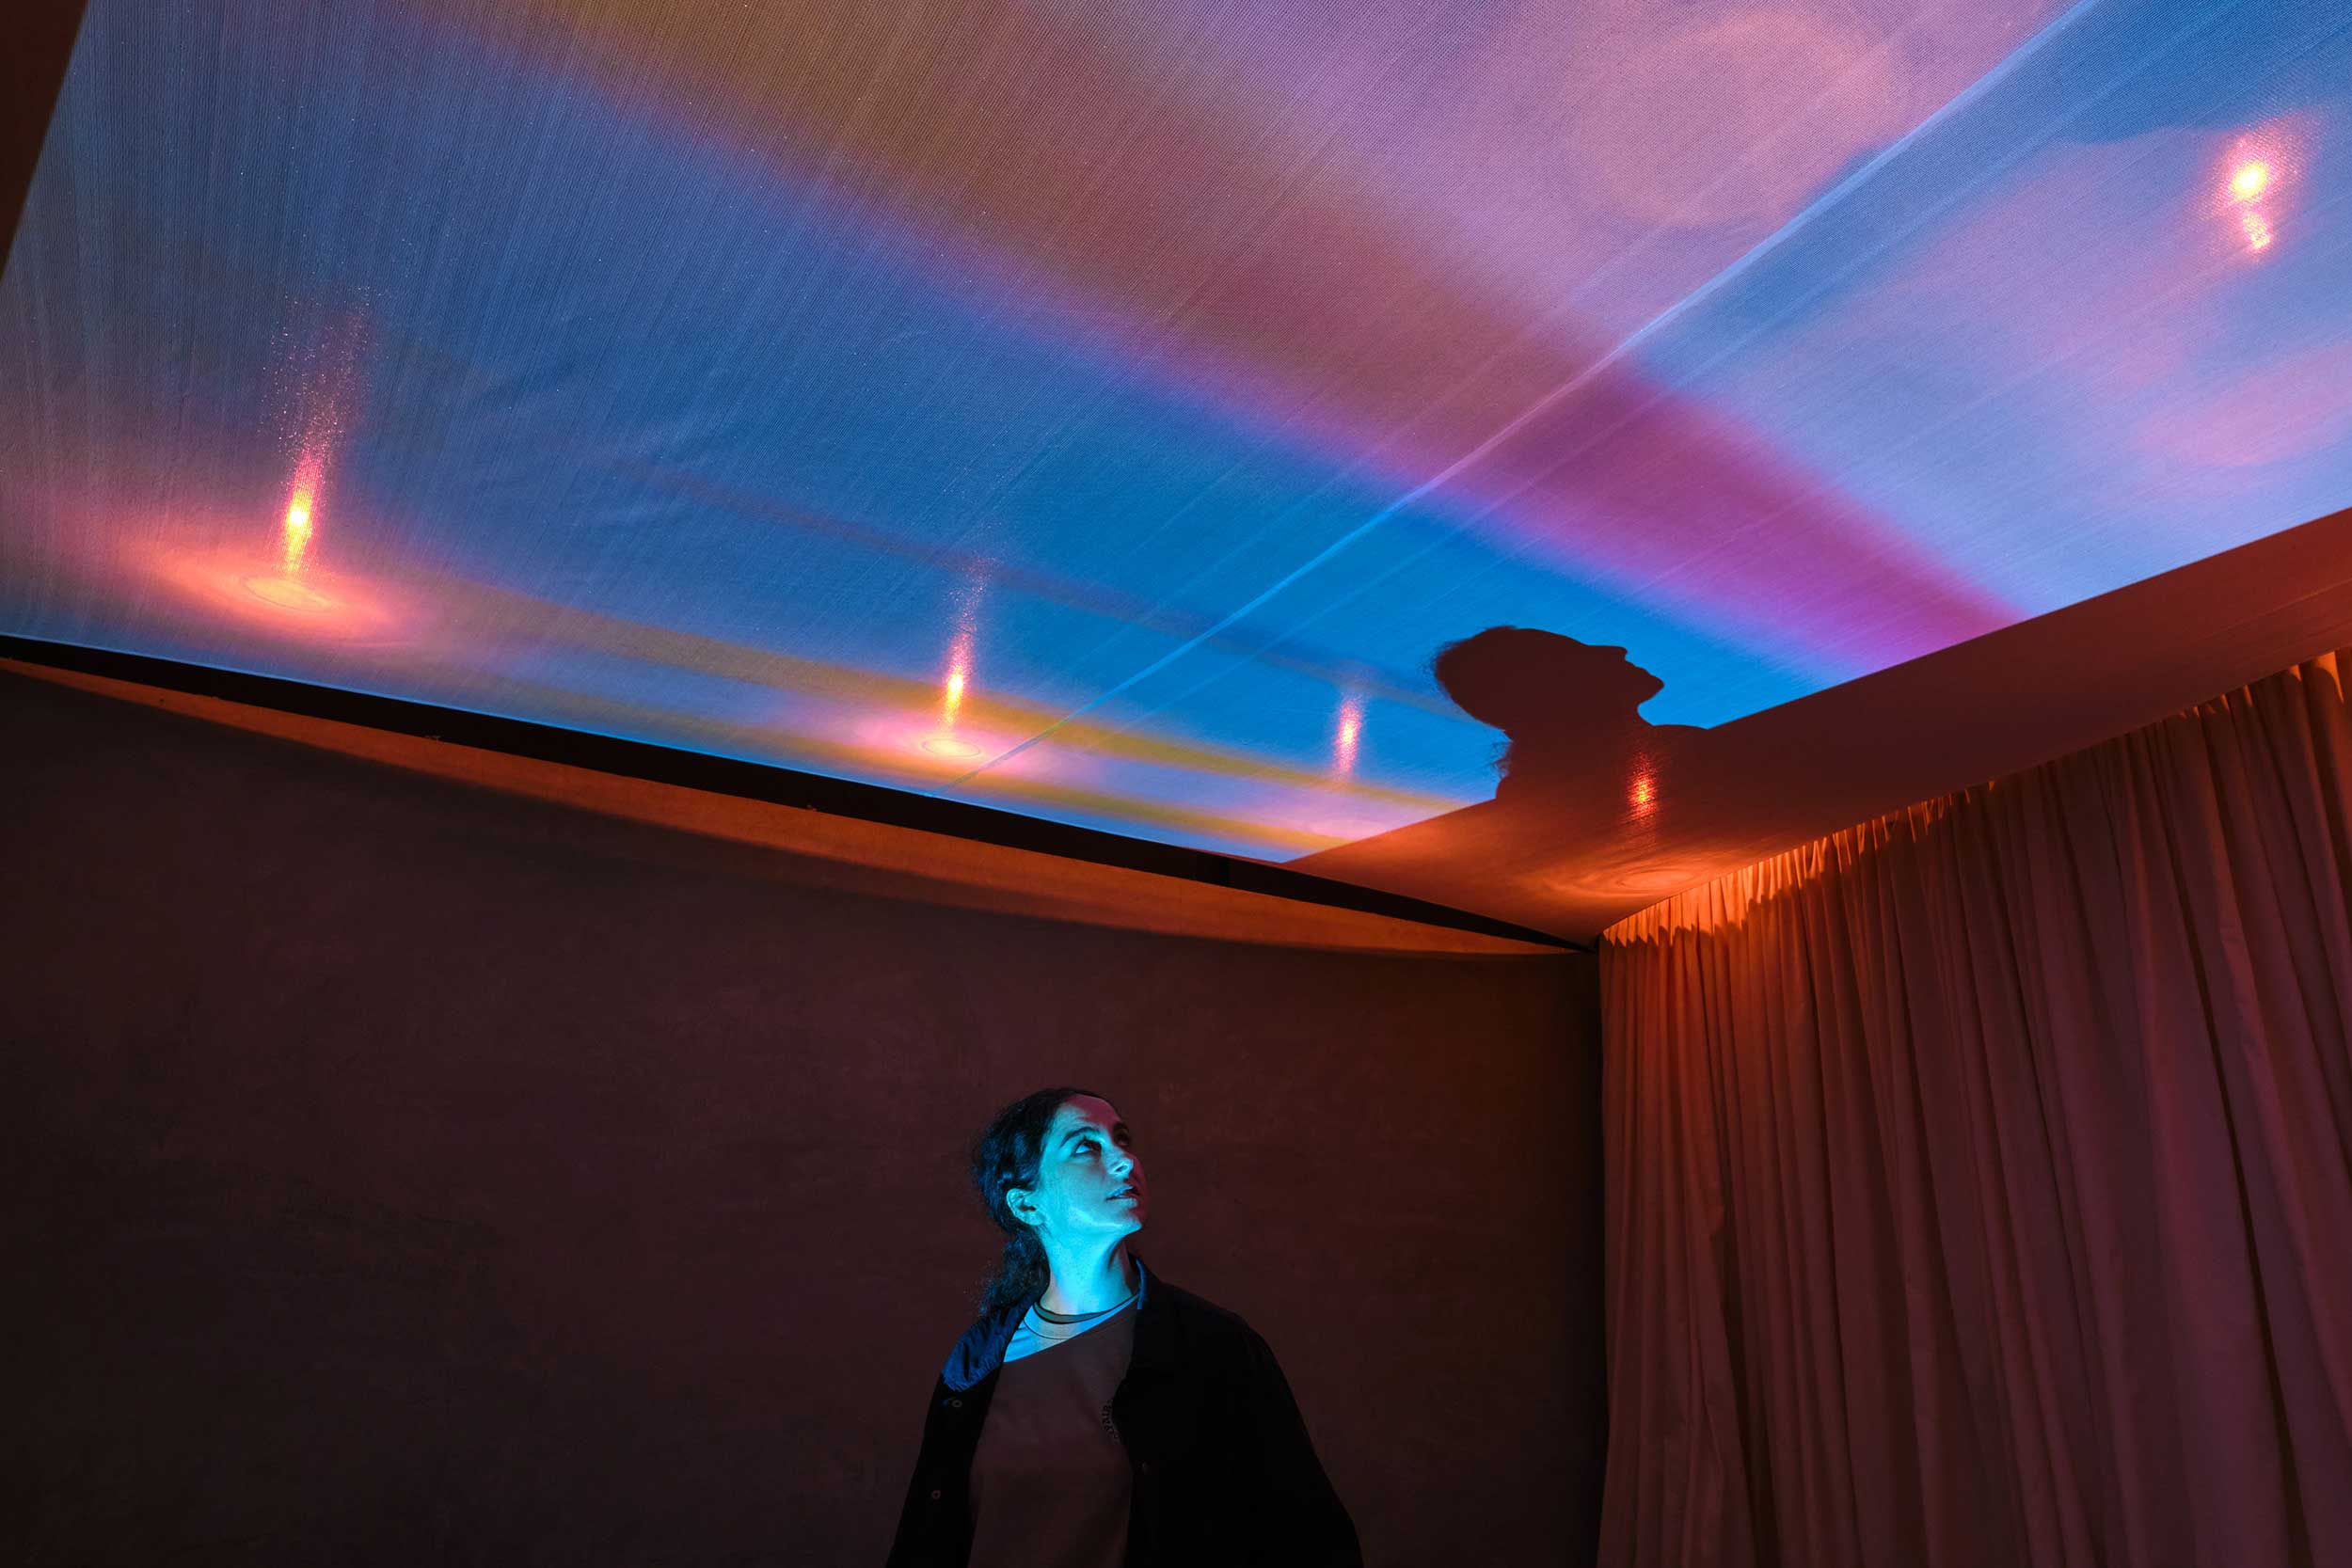 A woman stands in a dark space with her face illuminated by video projection on the ceiling